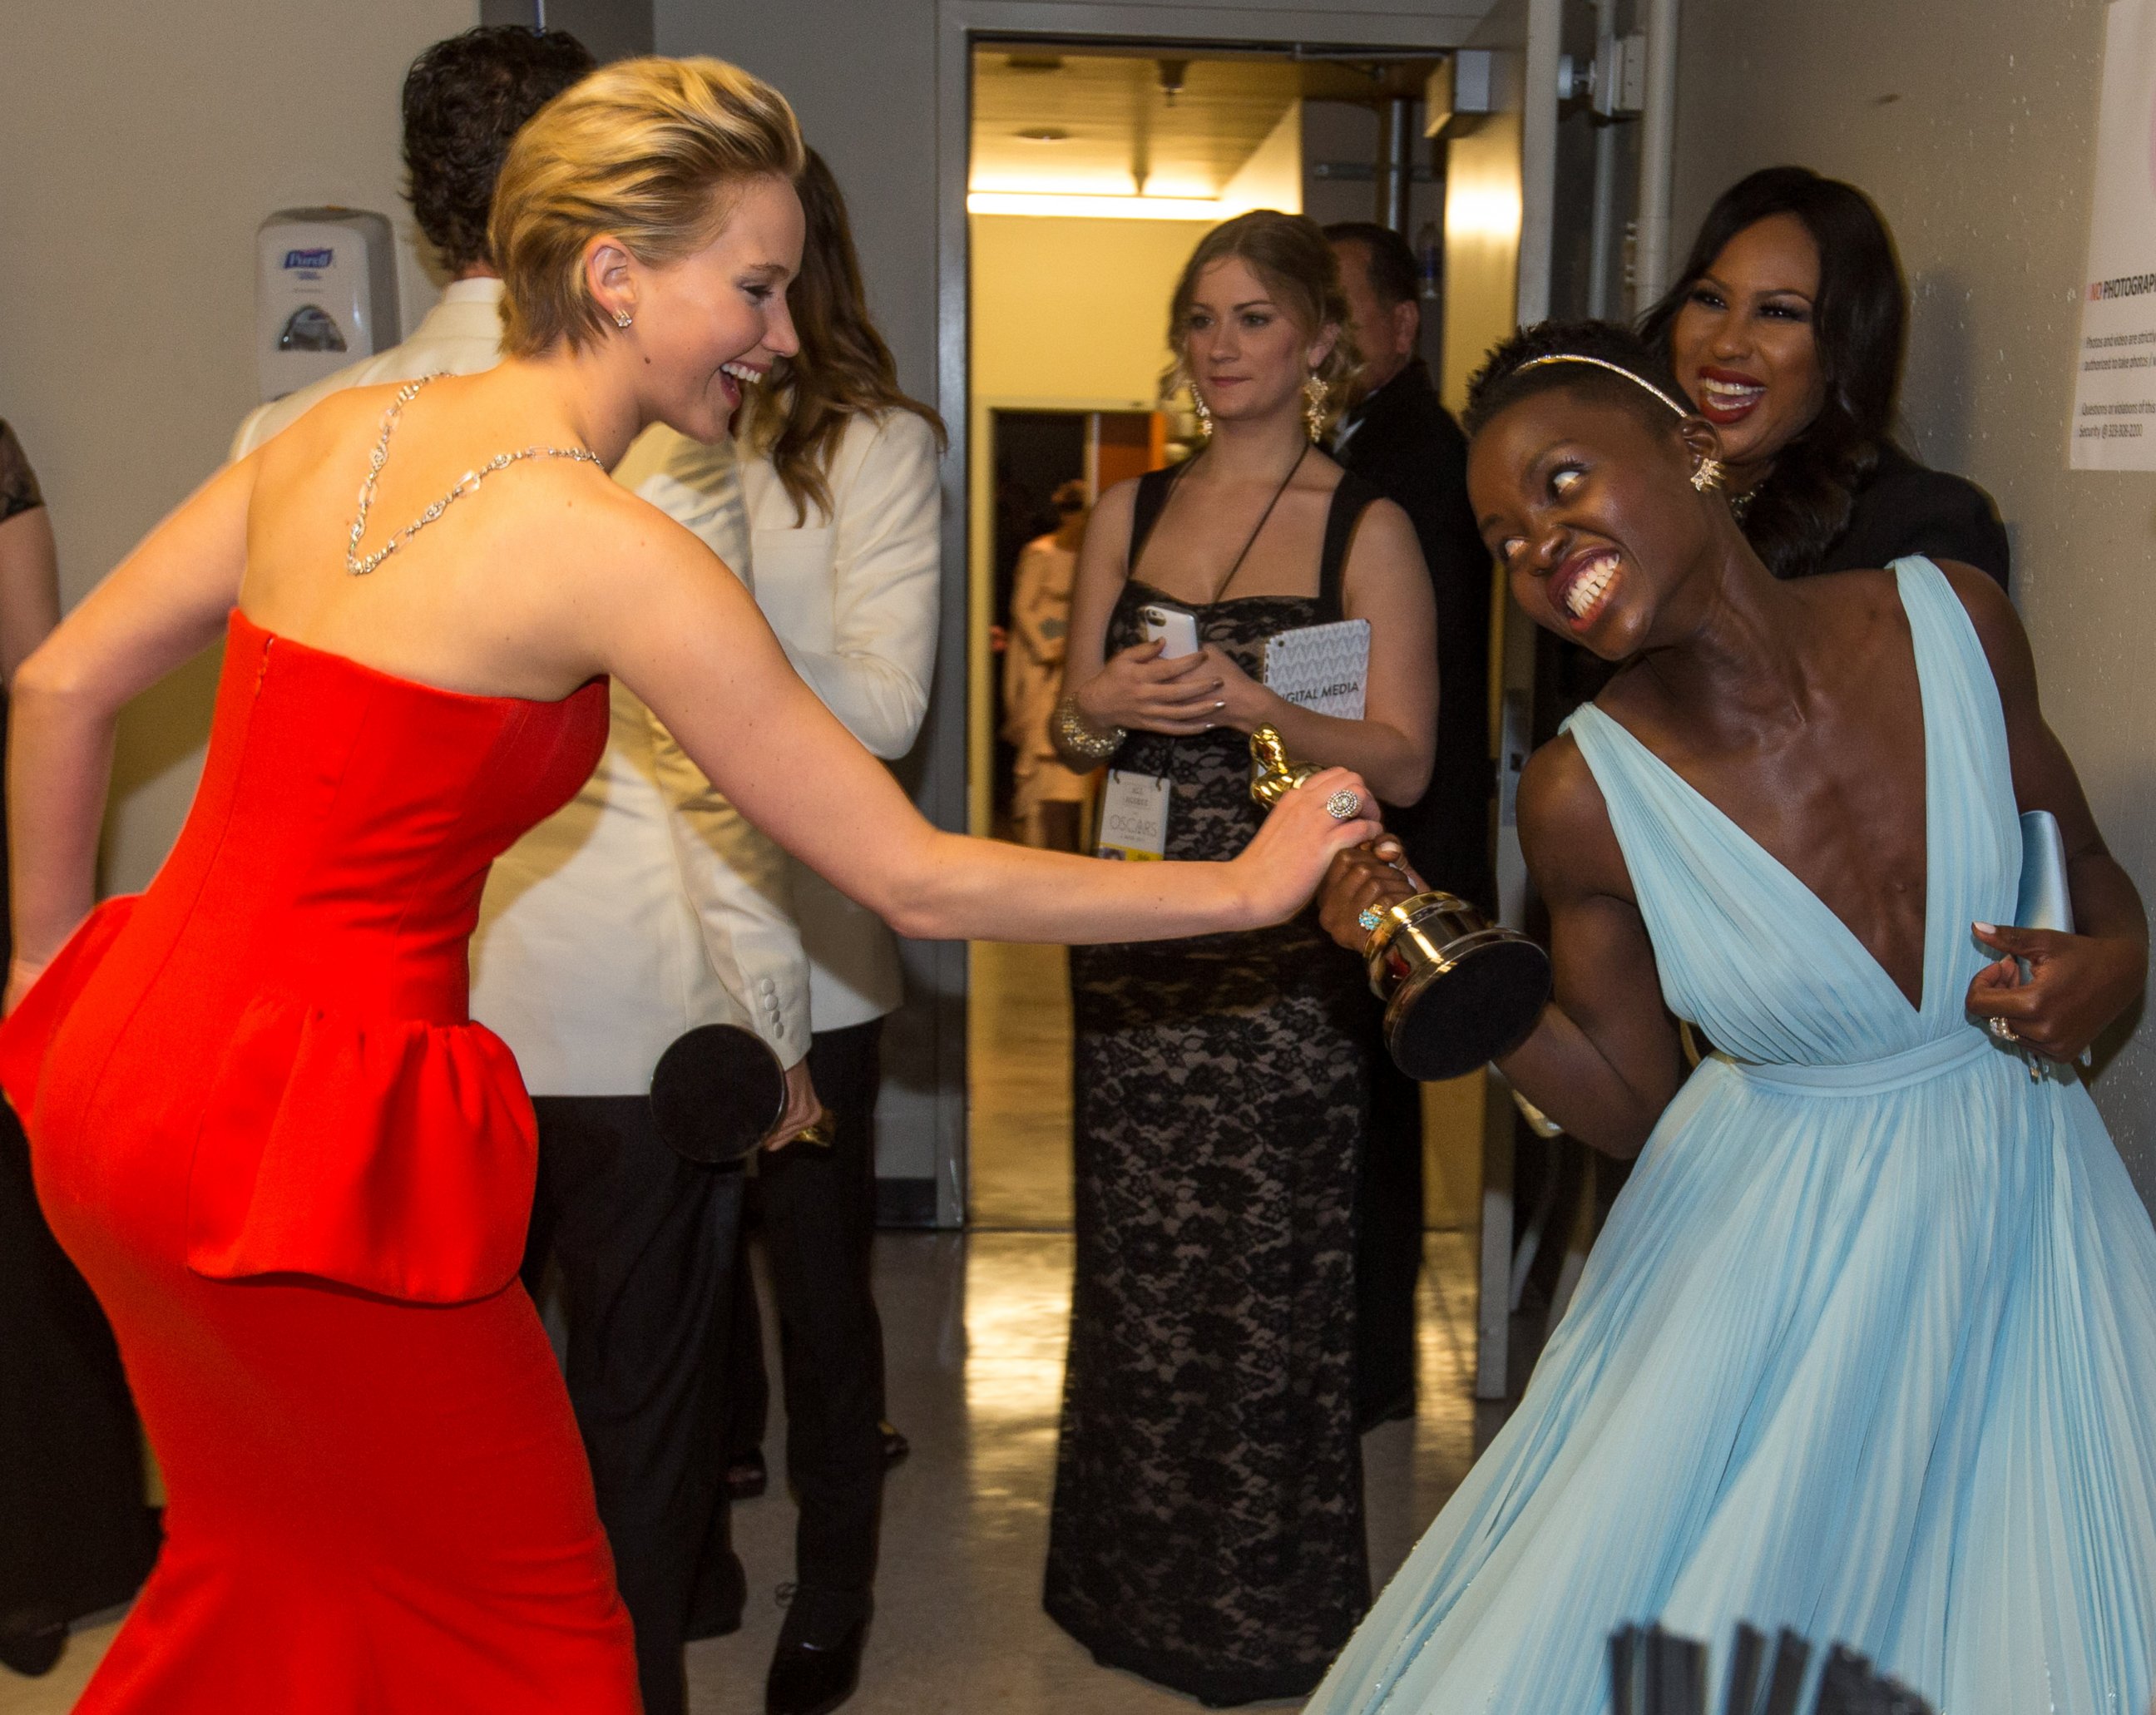 PHOTO: Jennifer Lawrence, left, is pictured with Lupita Nyong'o, right, backstage during the Oscars on Mar. 2, 2014 in Hollywood, Calif.  